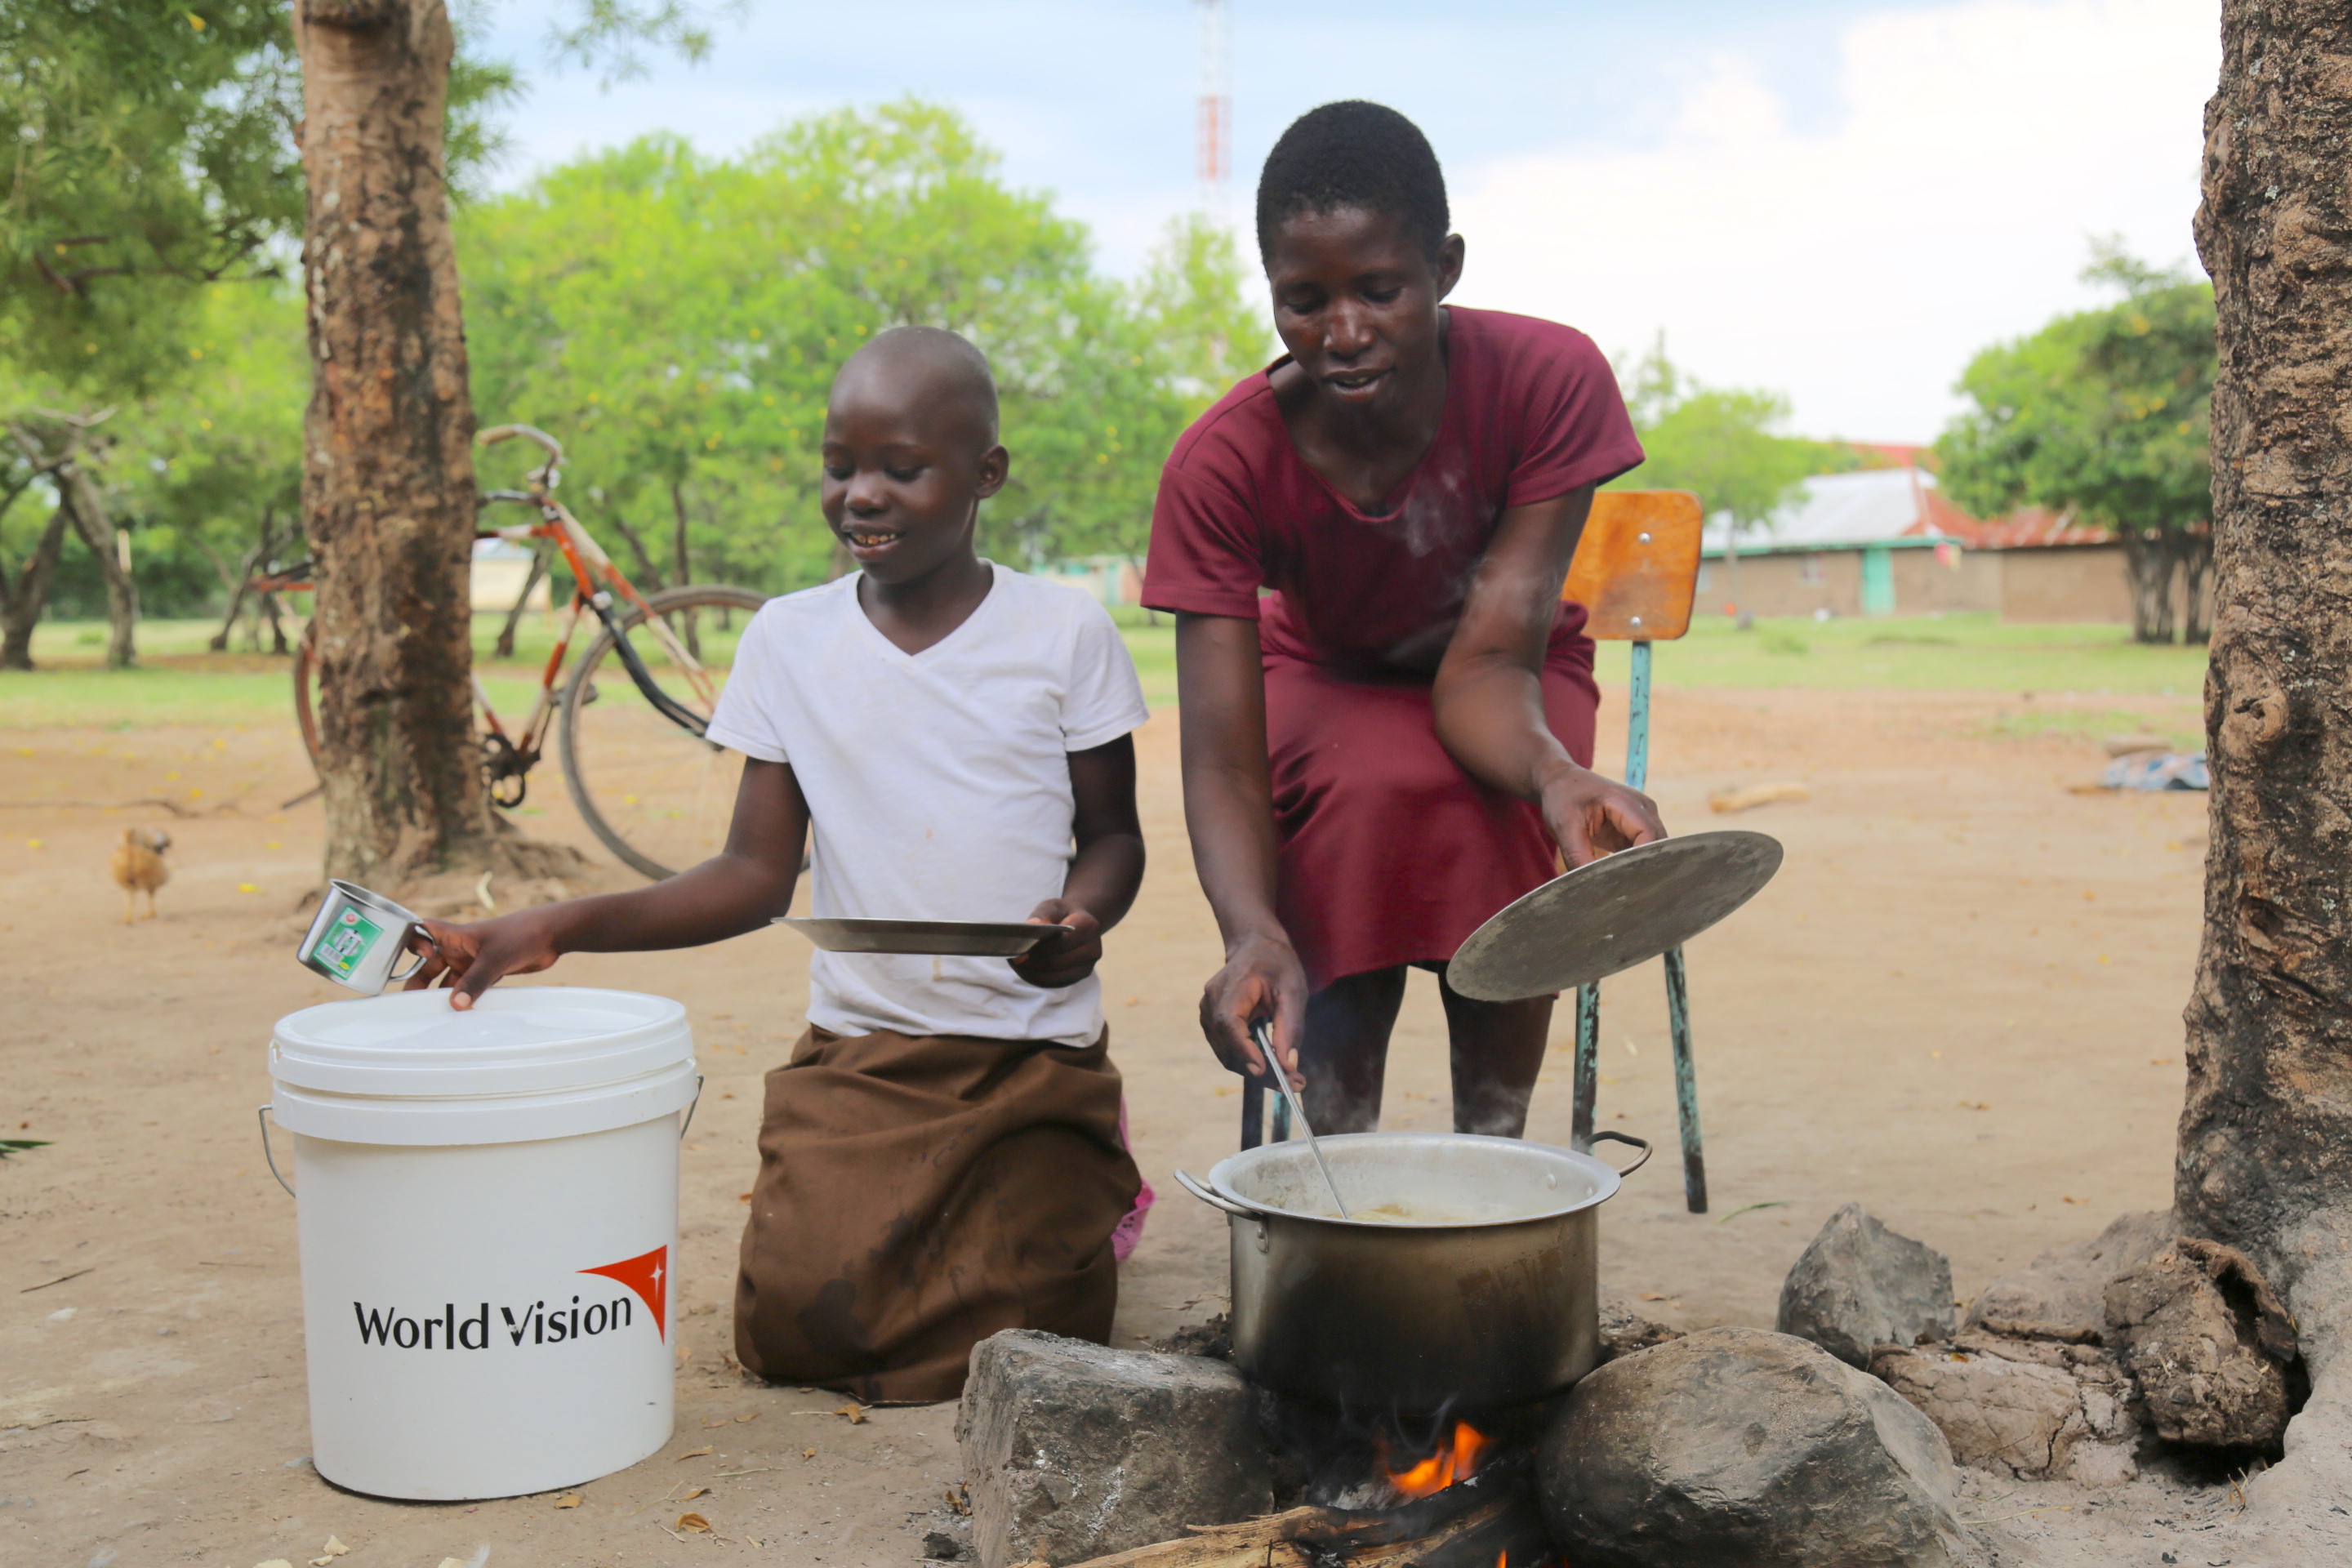 Elseba and her daughter Mitchell preparing food at the camp using the cooking utensils that they received from World Vision. ©World Vision Photo/Irene Sinoya.